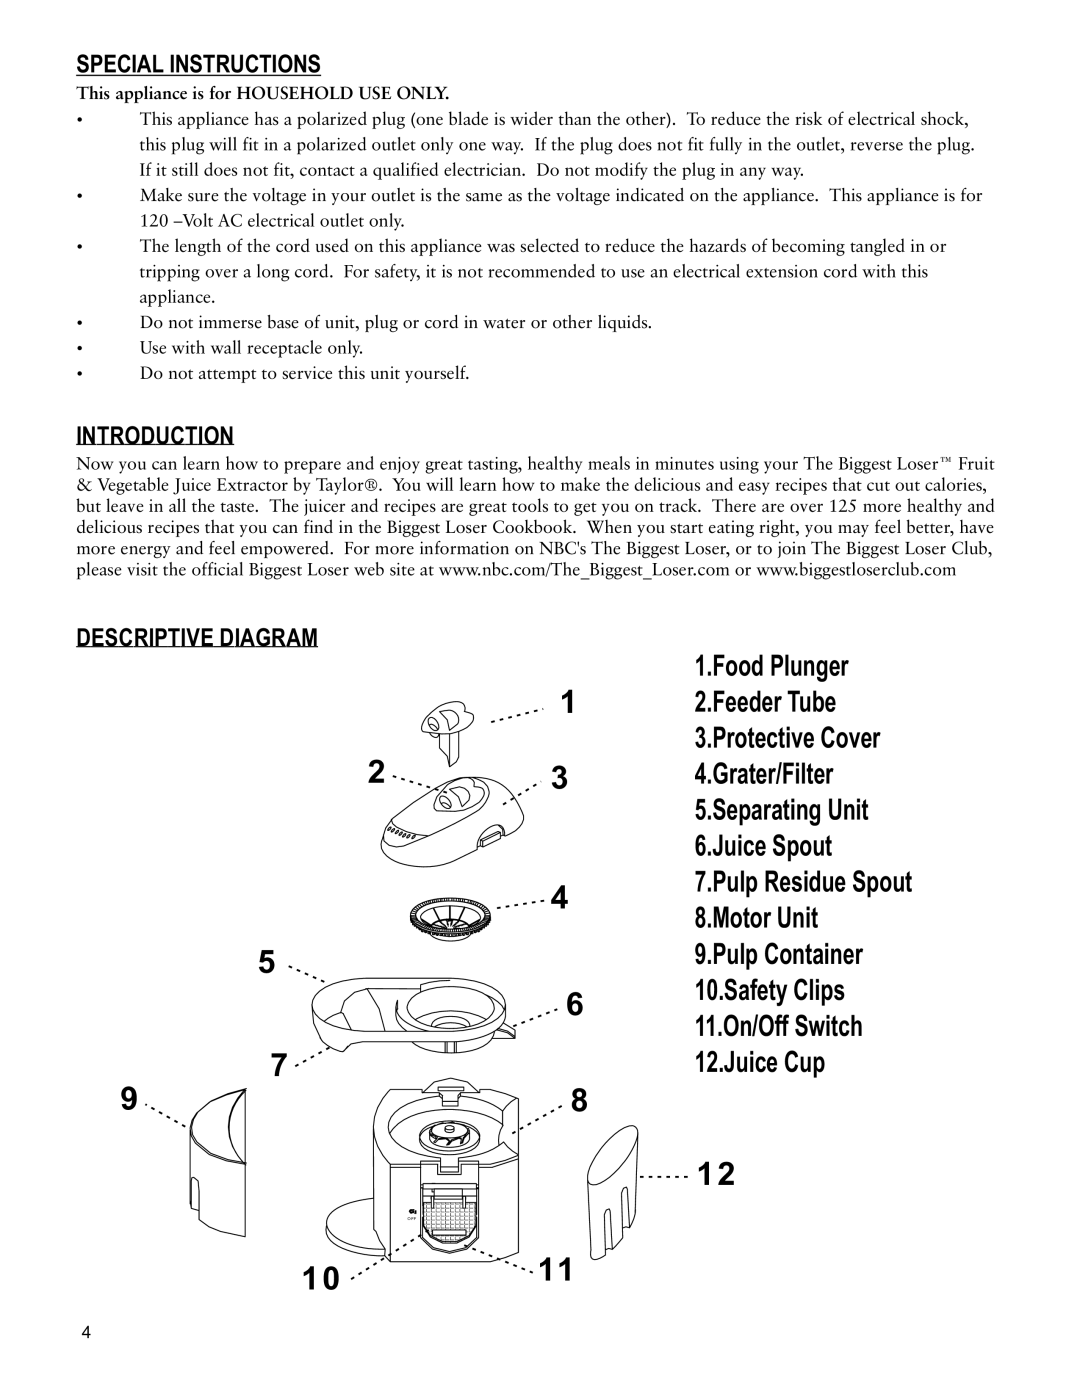 Taylor AJ-1450-BL manual Special Instructions, Introduction, Descriptive Diagram, This appliance is for HOUSEHOLD USE ONLY 